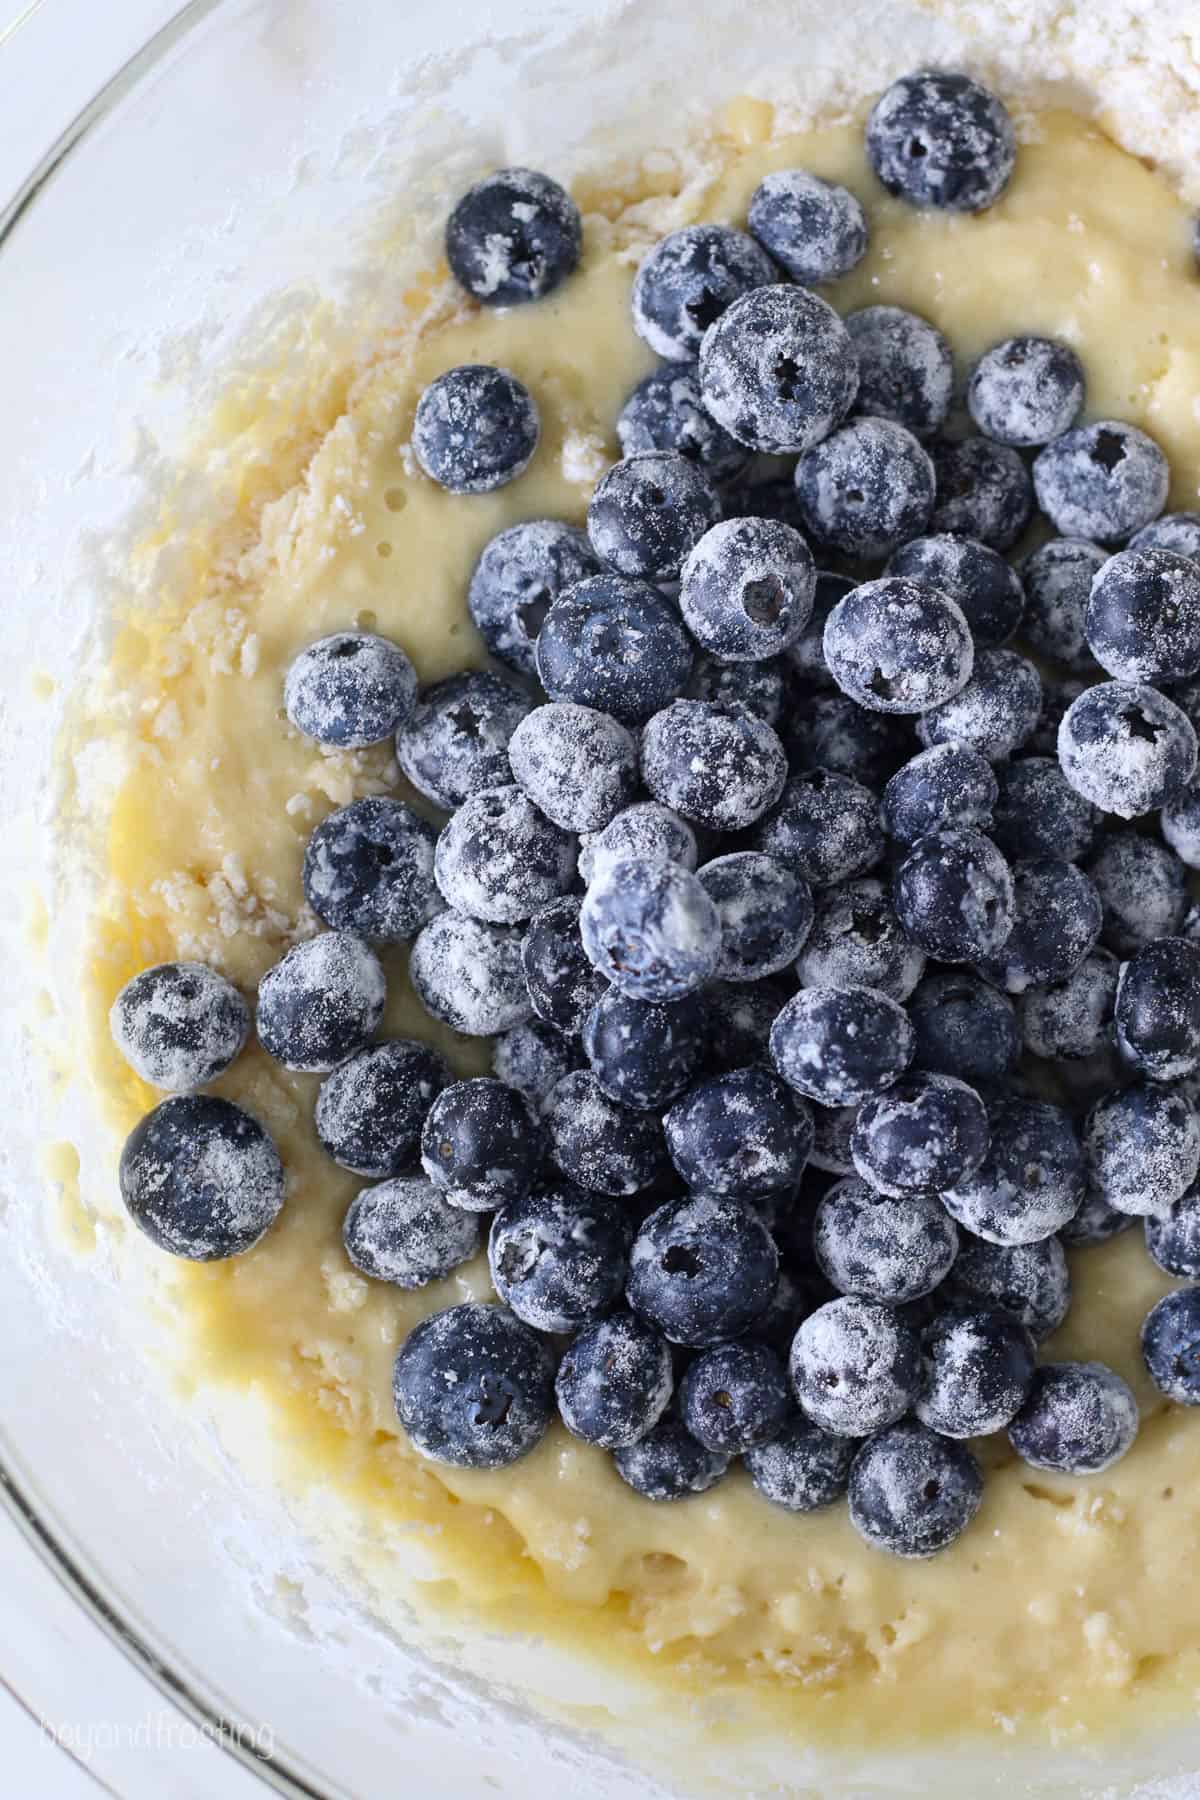 a glass mixing bowl of bread batter with floured blueberries